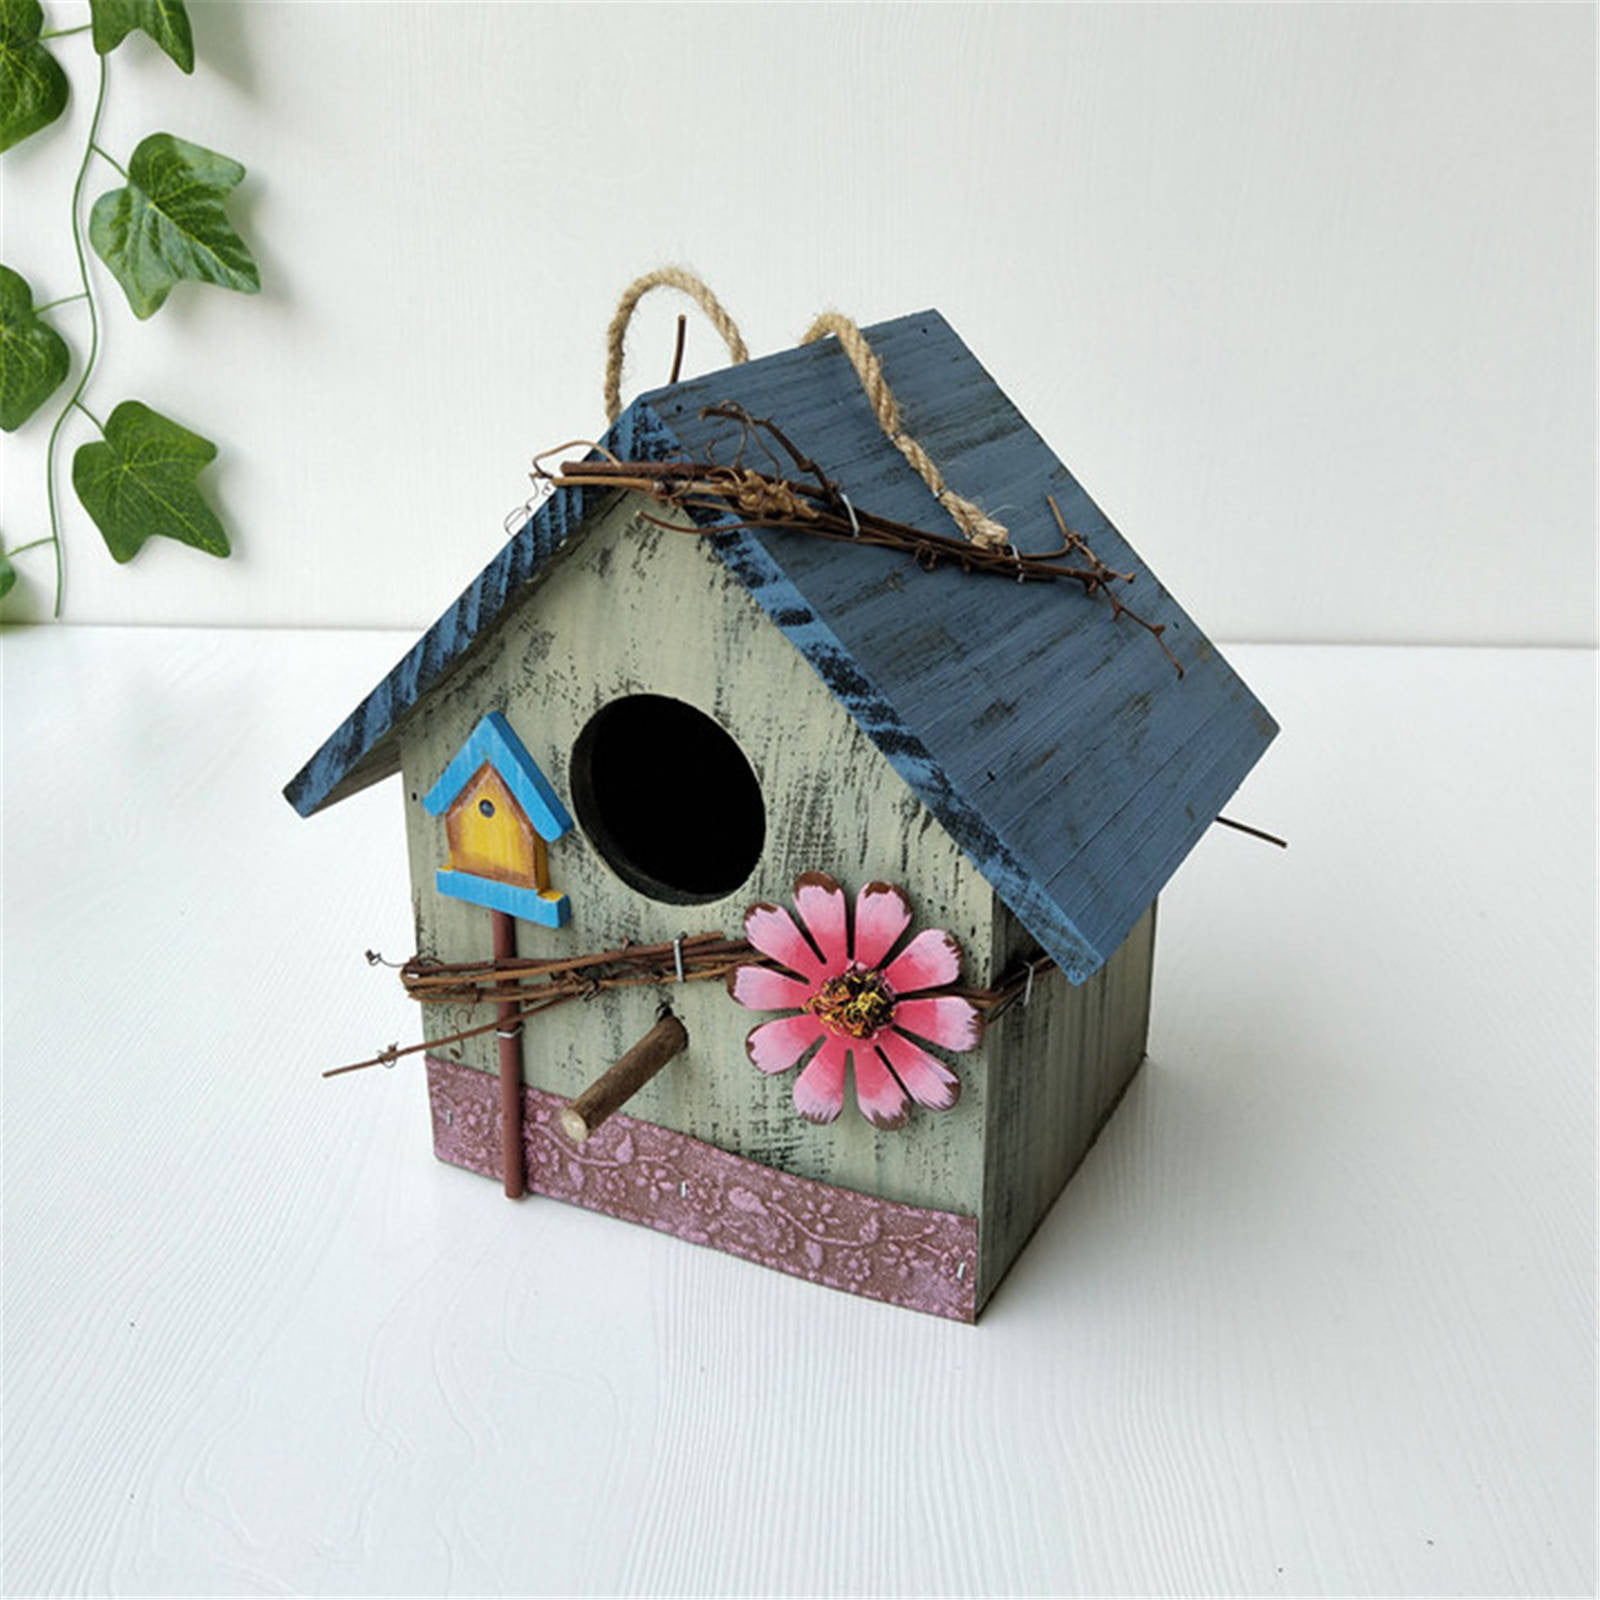 Birdhouse Soft Wood handpainted by me Small sits/can hang deco bird Choose 1 